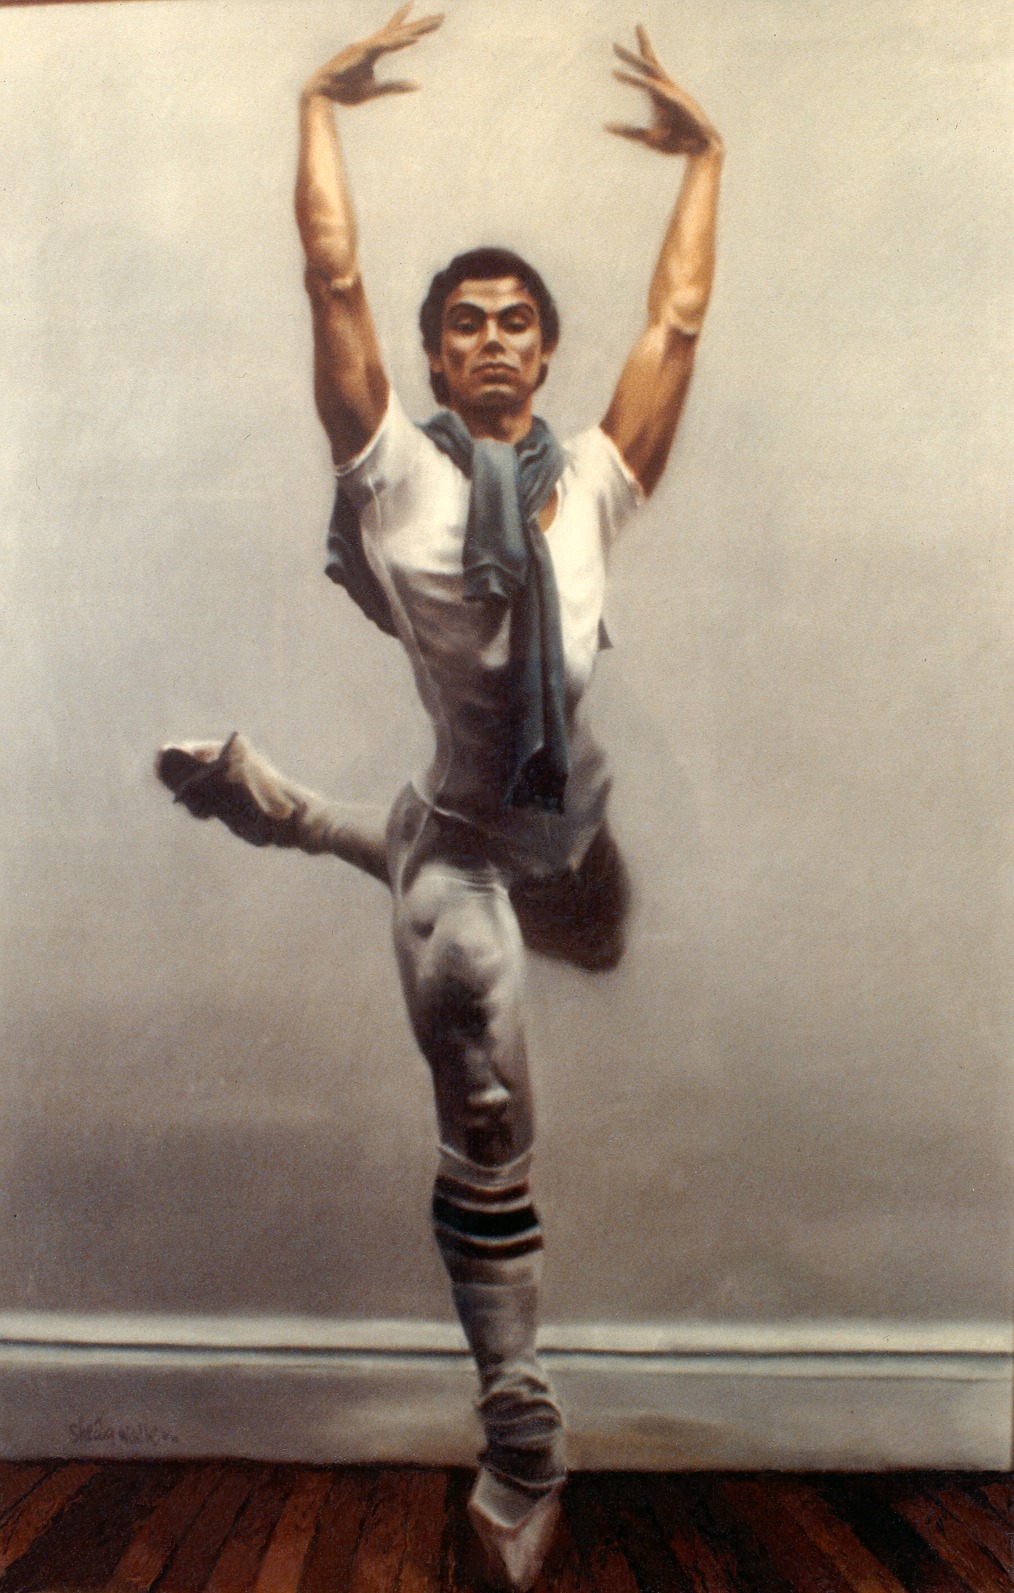 Painting of Michael Dane from Dancer Series by Sheila Wolk Hammer Gallery 1977